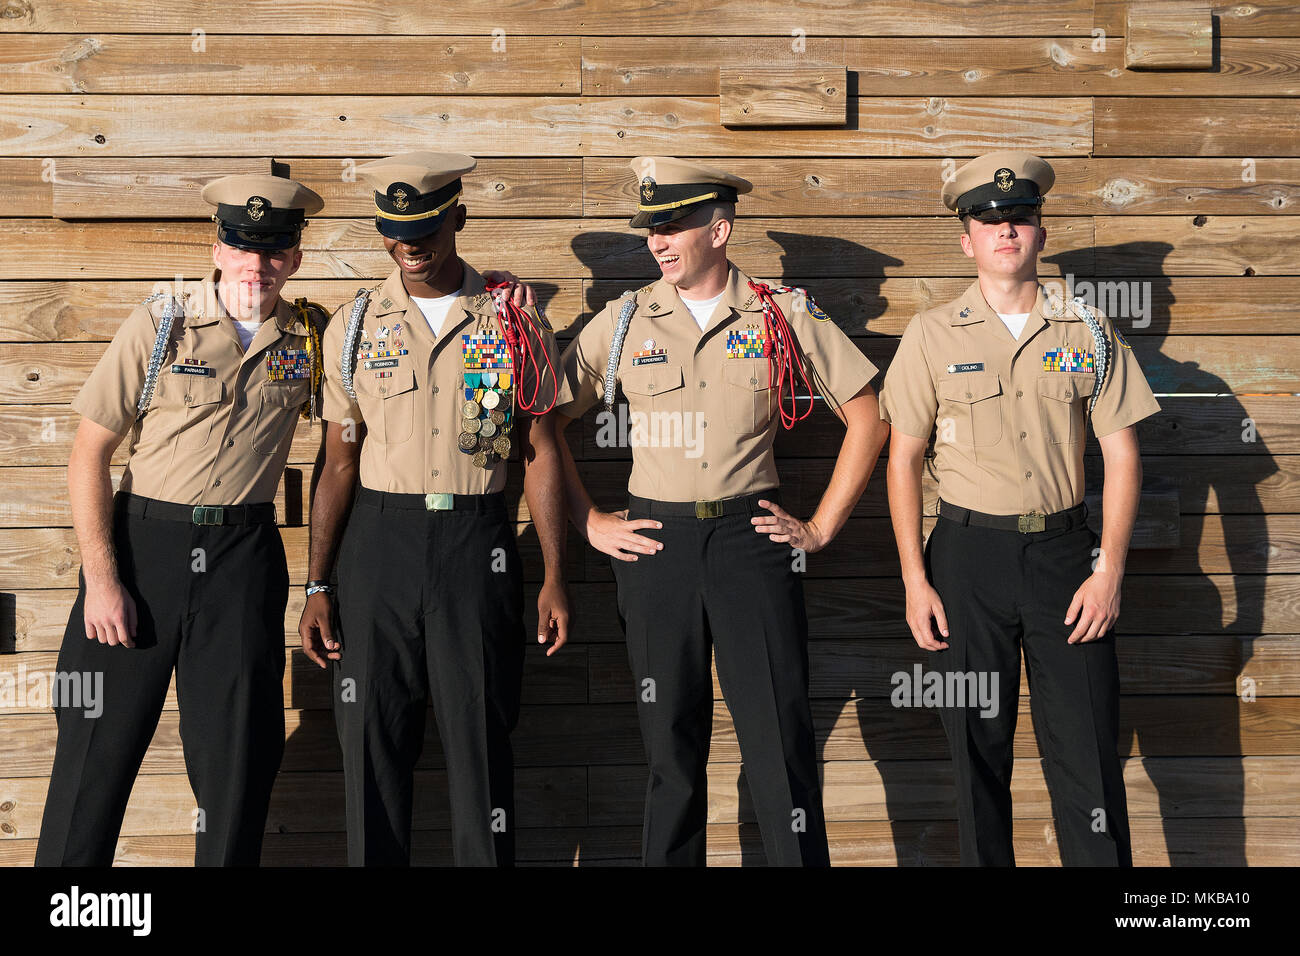 171104-N-PJ969-0120 FORT PIERCE, Fla., (Nov. 4, 2017) Navy Junior Reserve Officers Training Corps Cadets Micheal Parnass, Dave Robinson, Jordan Verderber and Matthew Ciolino from the St. Lucie West Centennial High ceremonial guard, prepare to parade the colors before a U.S. Navy public demonstration. (U.S. Navy photo by Petty Officer 1st Class Abe McNatt) Stock Photo